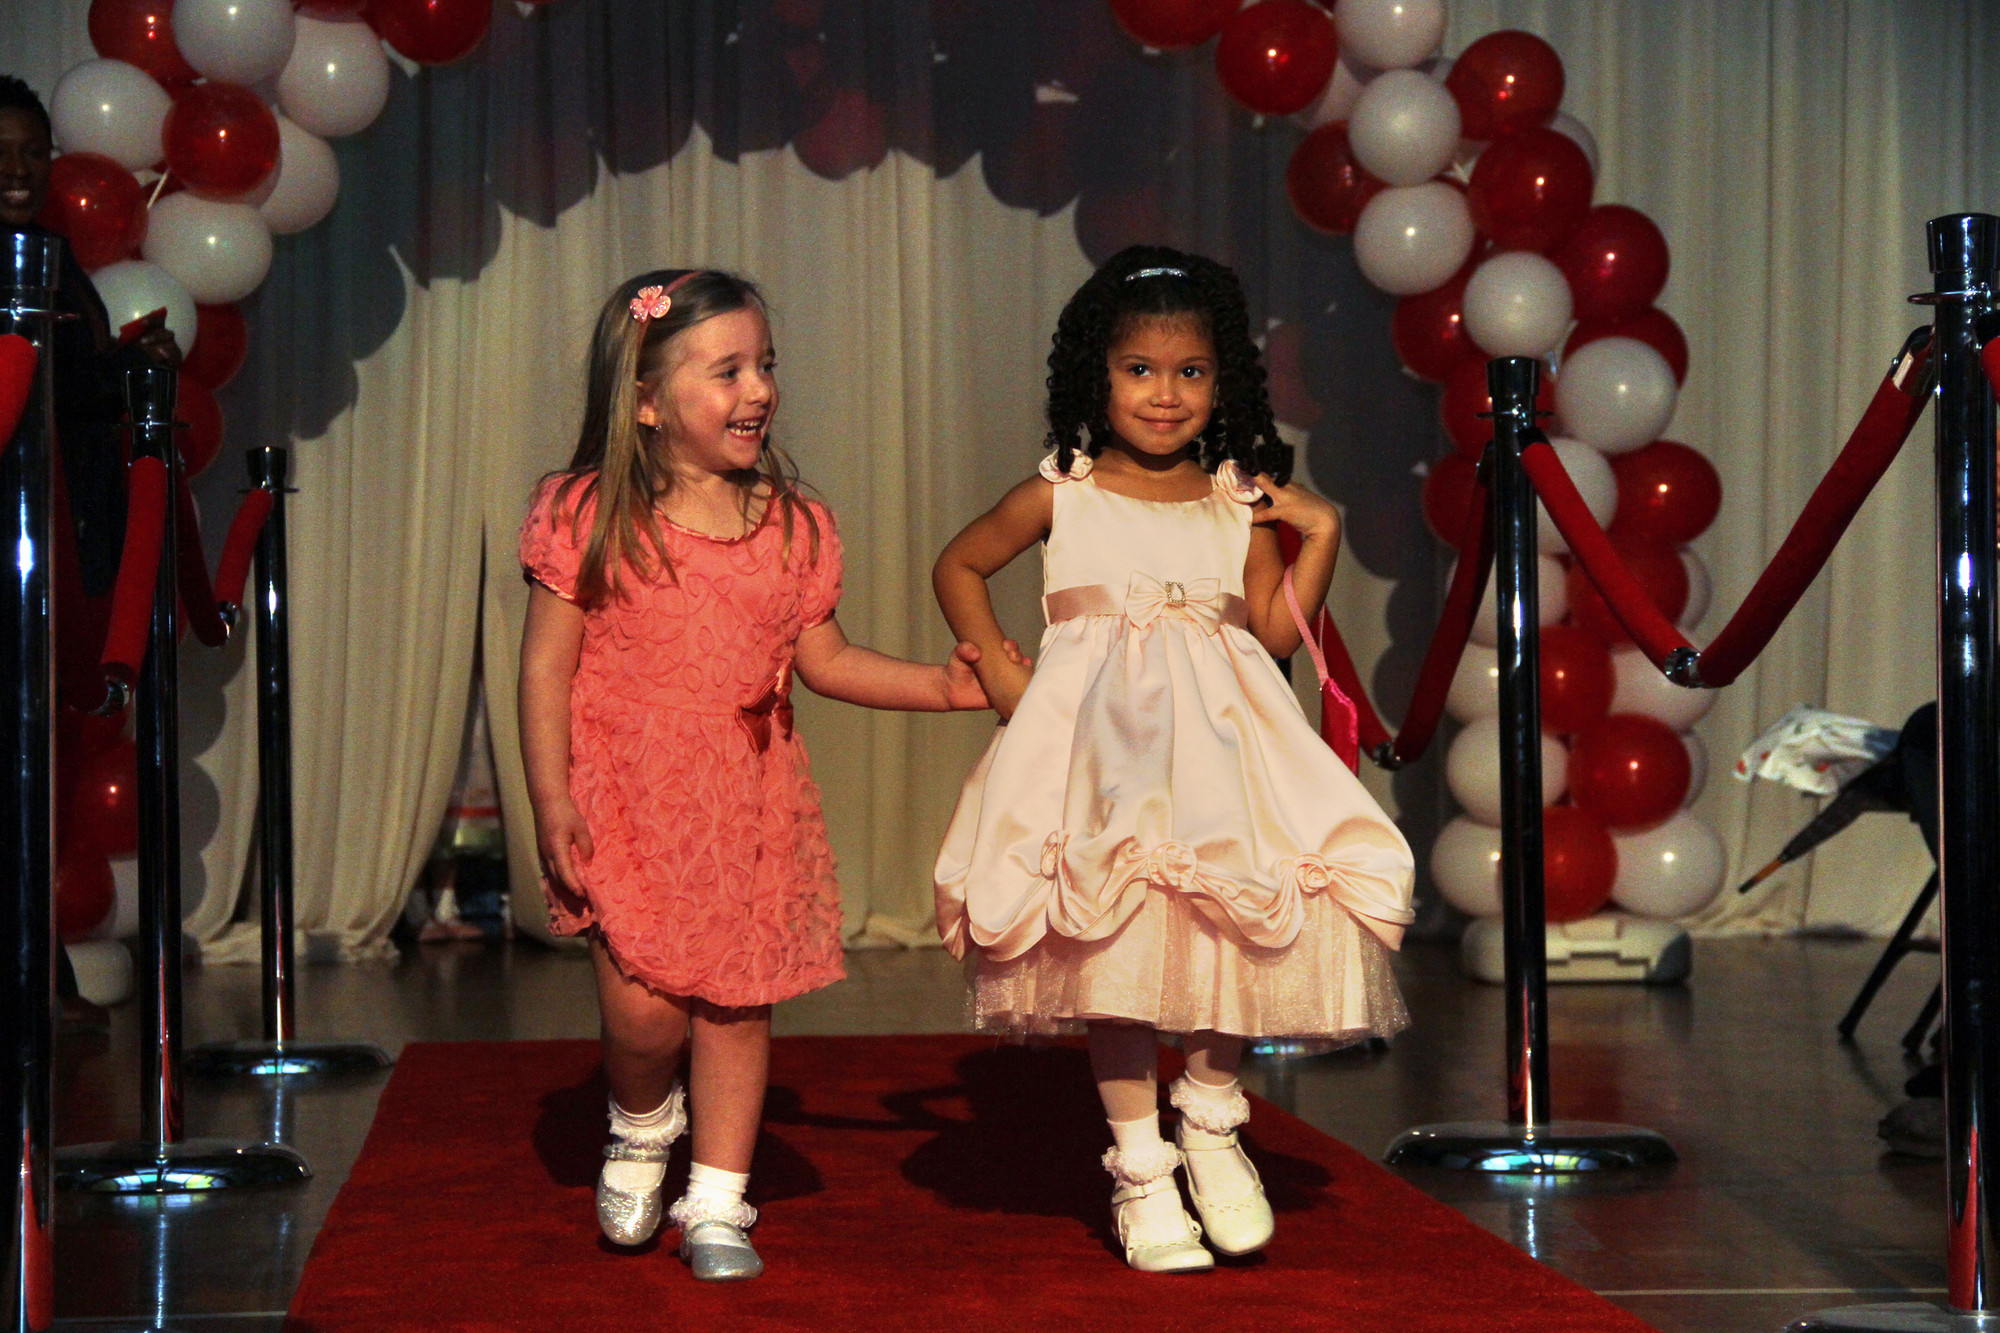 Rosann Passalacqua and Noell Crespo were models in Holy Name of Mary School’s fashion show on April 12 in the auditorium.